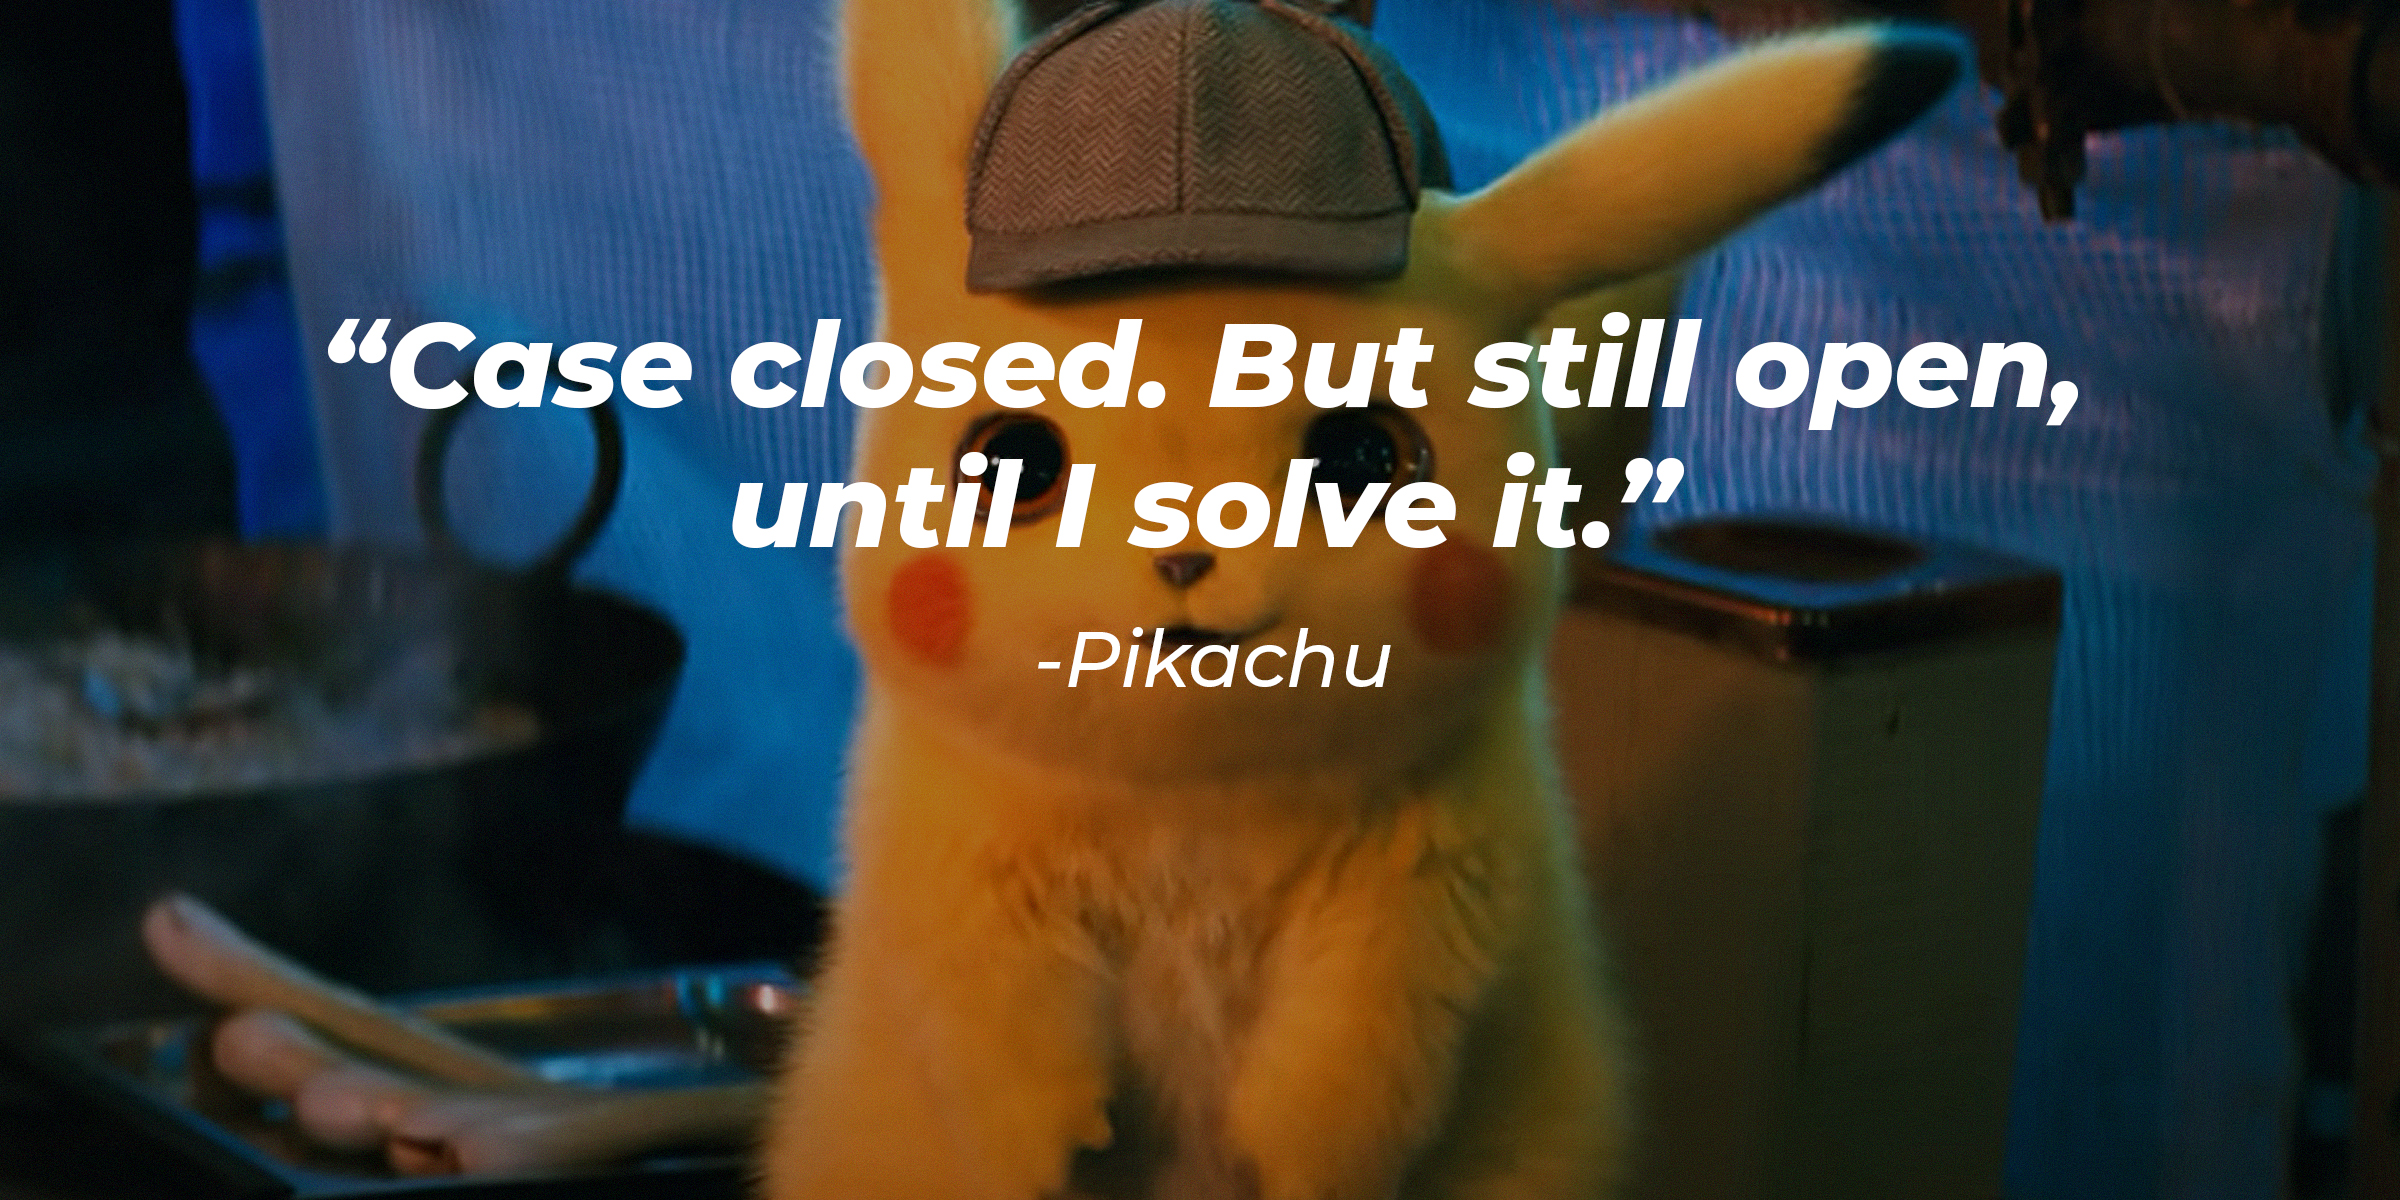 Photo of Pikachu with the quote: "Case closed. But still open, until I solve it." | Source: Youtube.com/WarnerBrosPictures